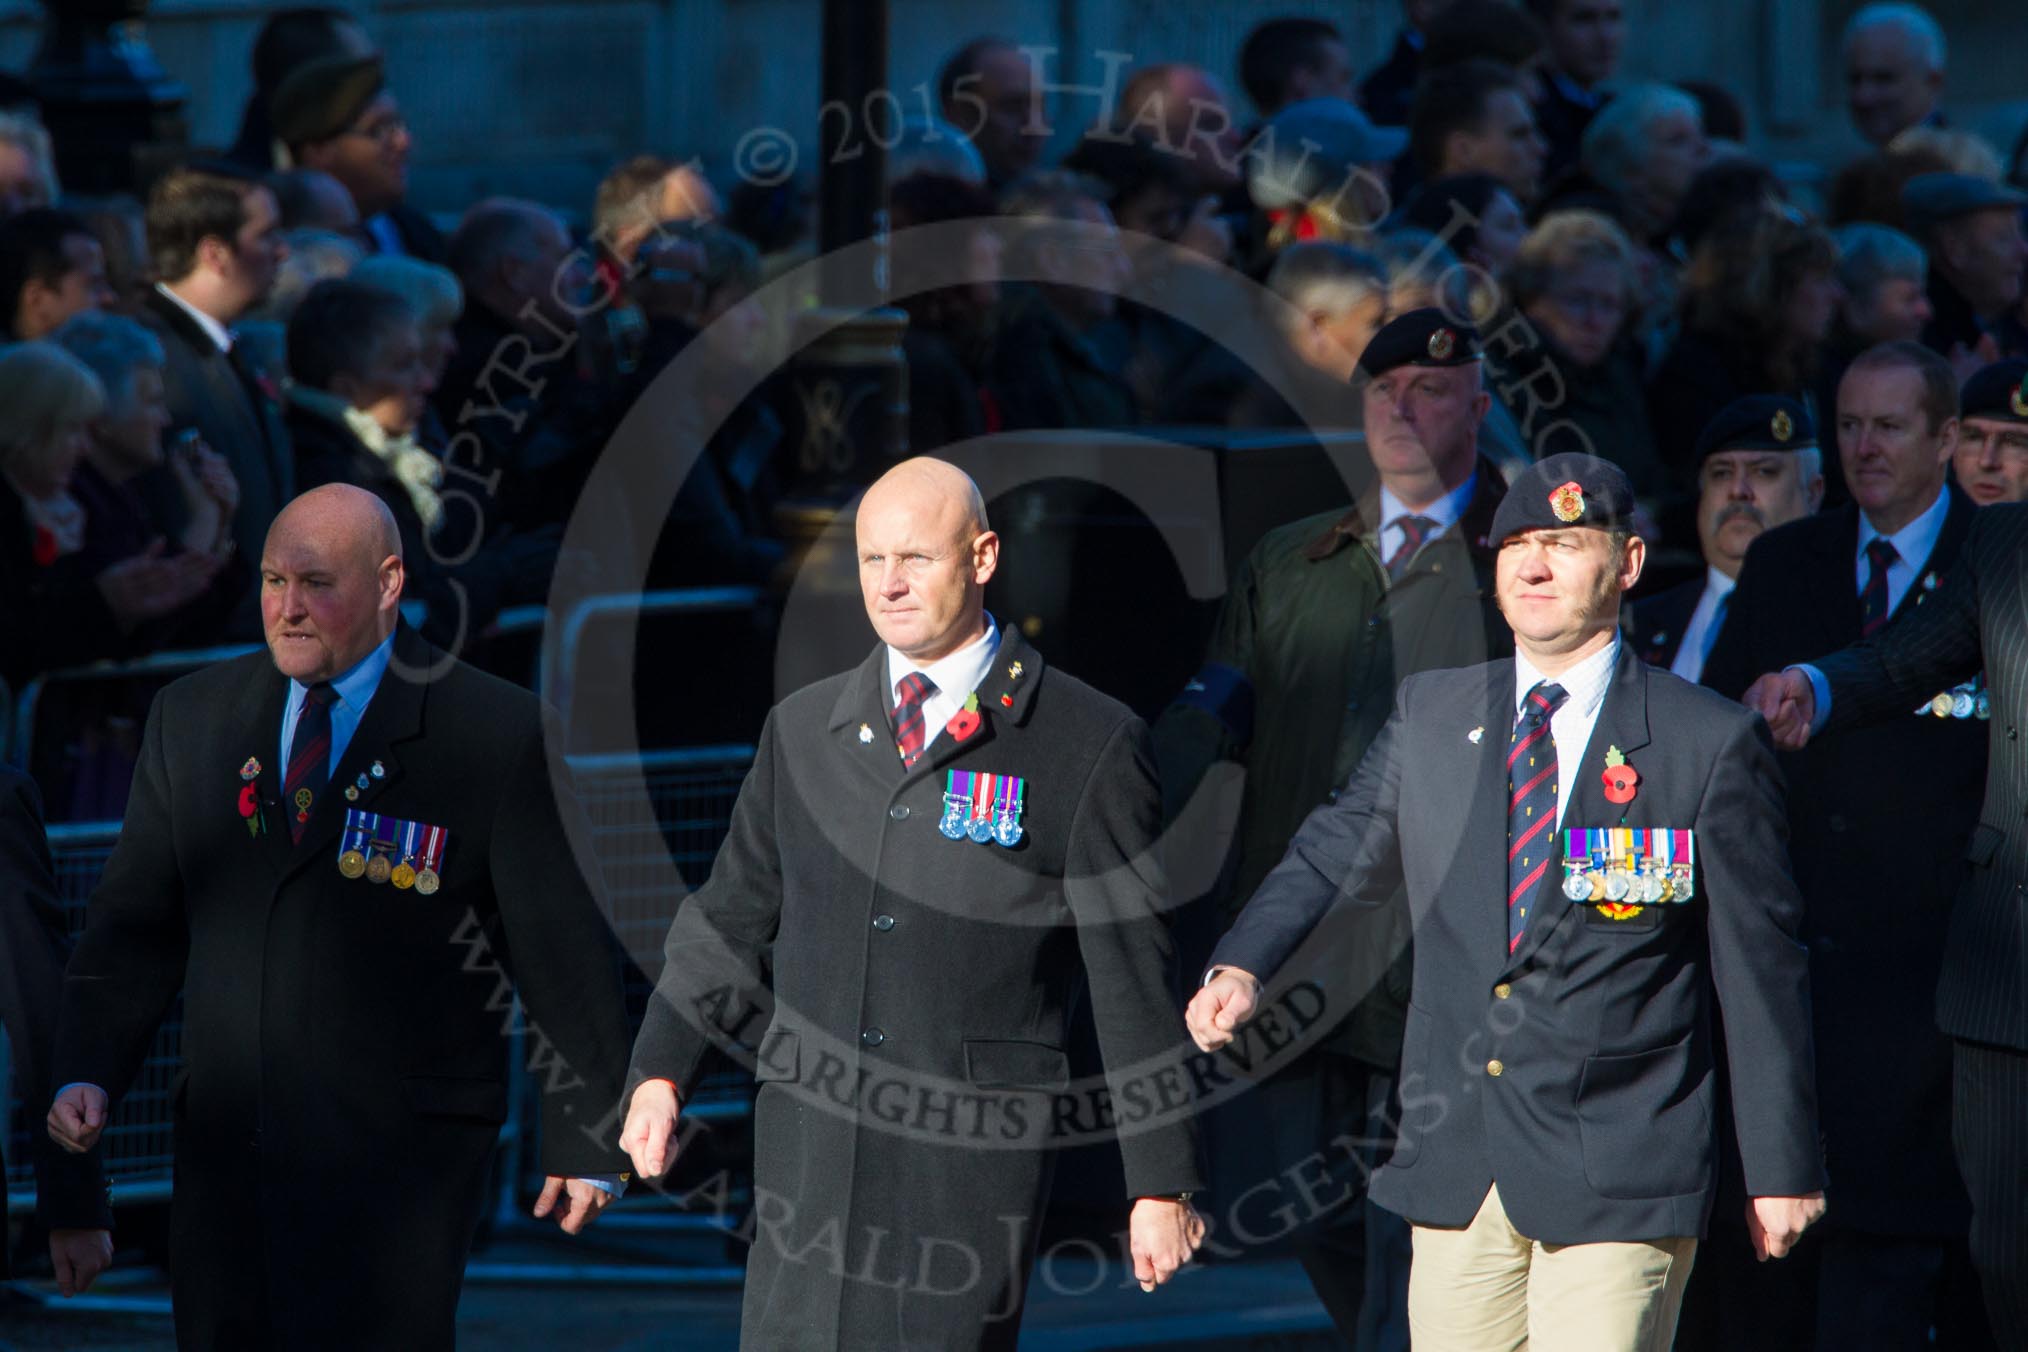 Remembrance Sunday Cenotaph March Past 2013: B20 - Royal Engineers Association..
Press stand opposite the Foreign Office building, Whitehall, London SW1,
London,
Greater London,
United Kingdom,
on 10 November 2013 at 12:01, image #1465